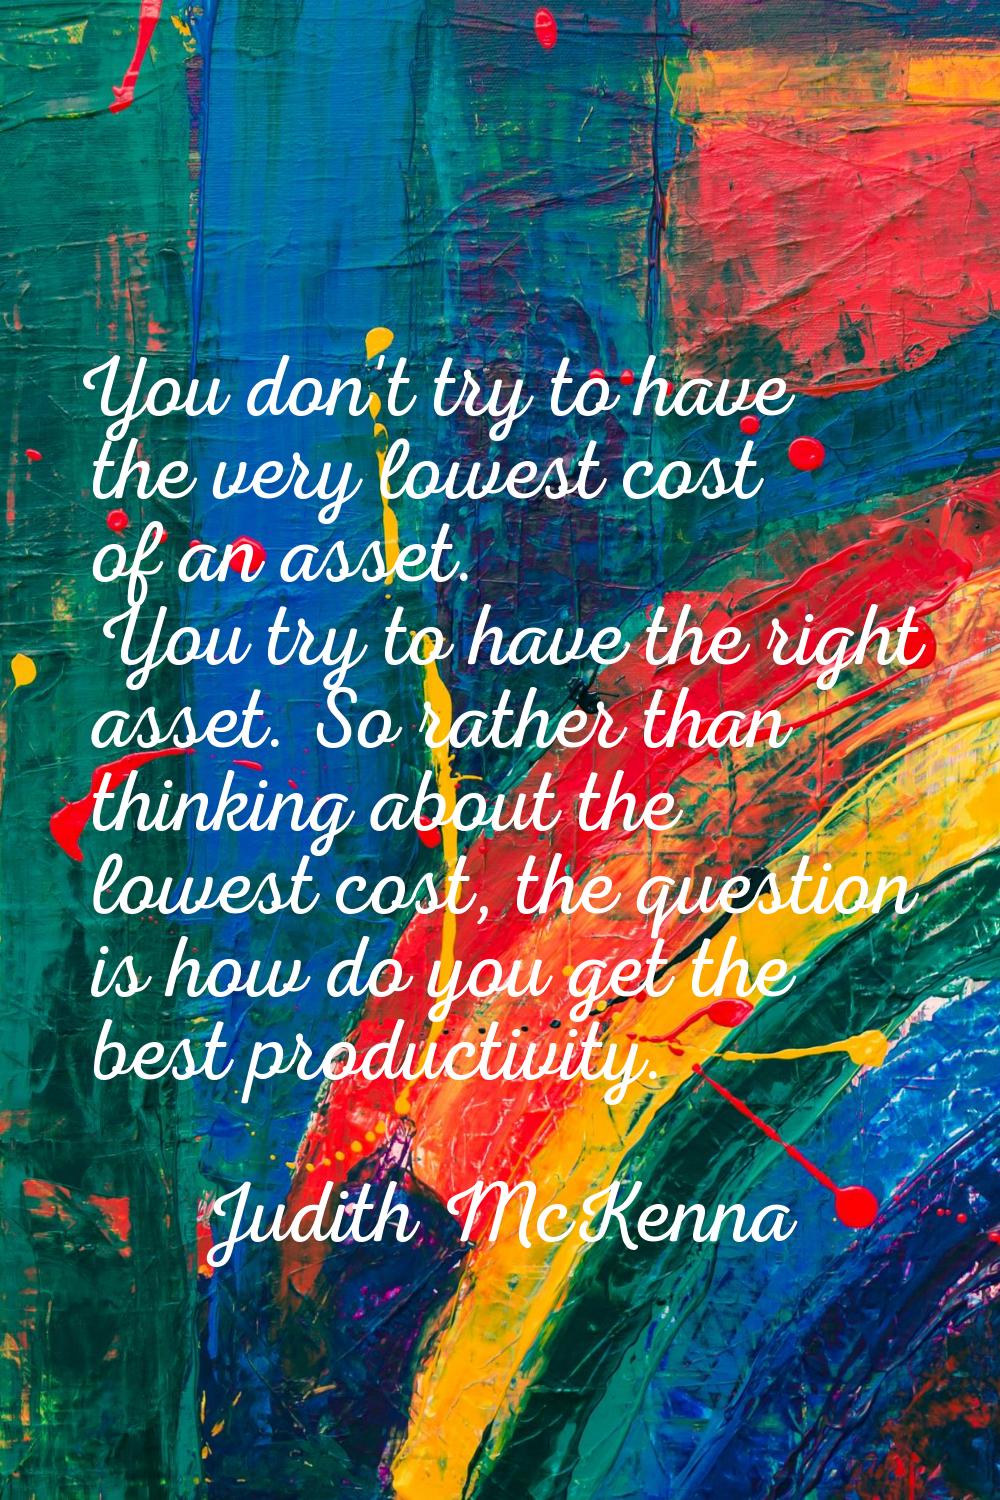 You don't try to have the very lowest cost of an asset. You try to have the right asset. So rather 